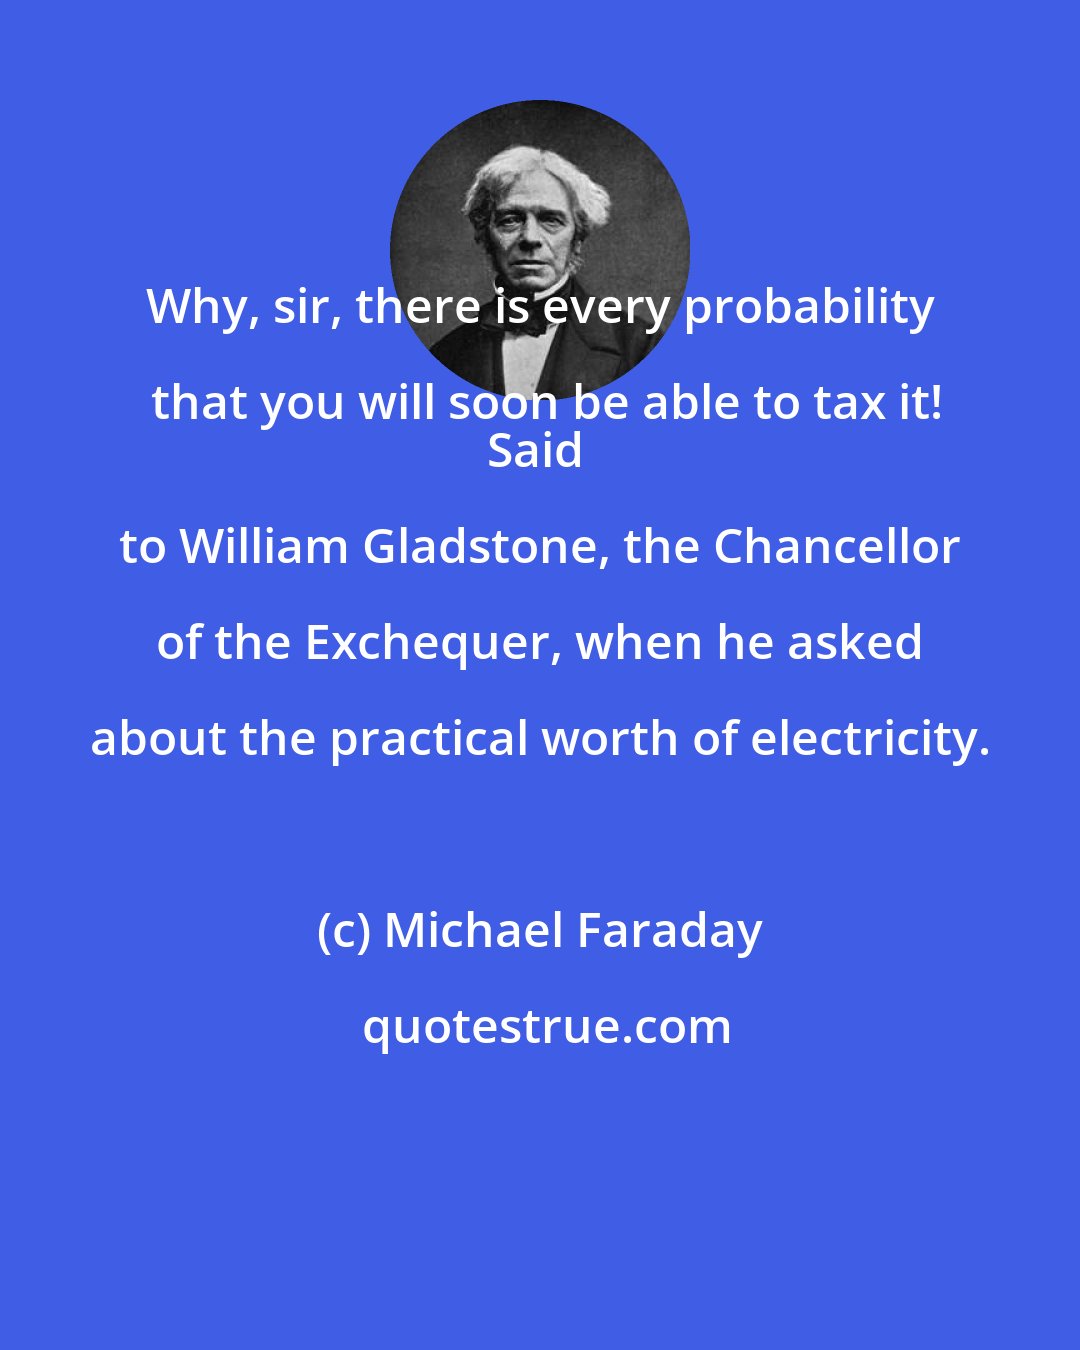 Michael Faraday: Why, sir, there is every probability that you will soon be able to tax it!
Said to William Gladstone, the Chancellor of the Exchequer, when he asked about the practical worth of electricity.